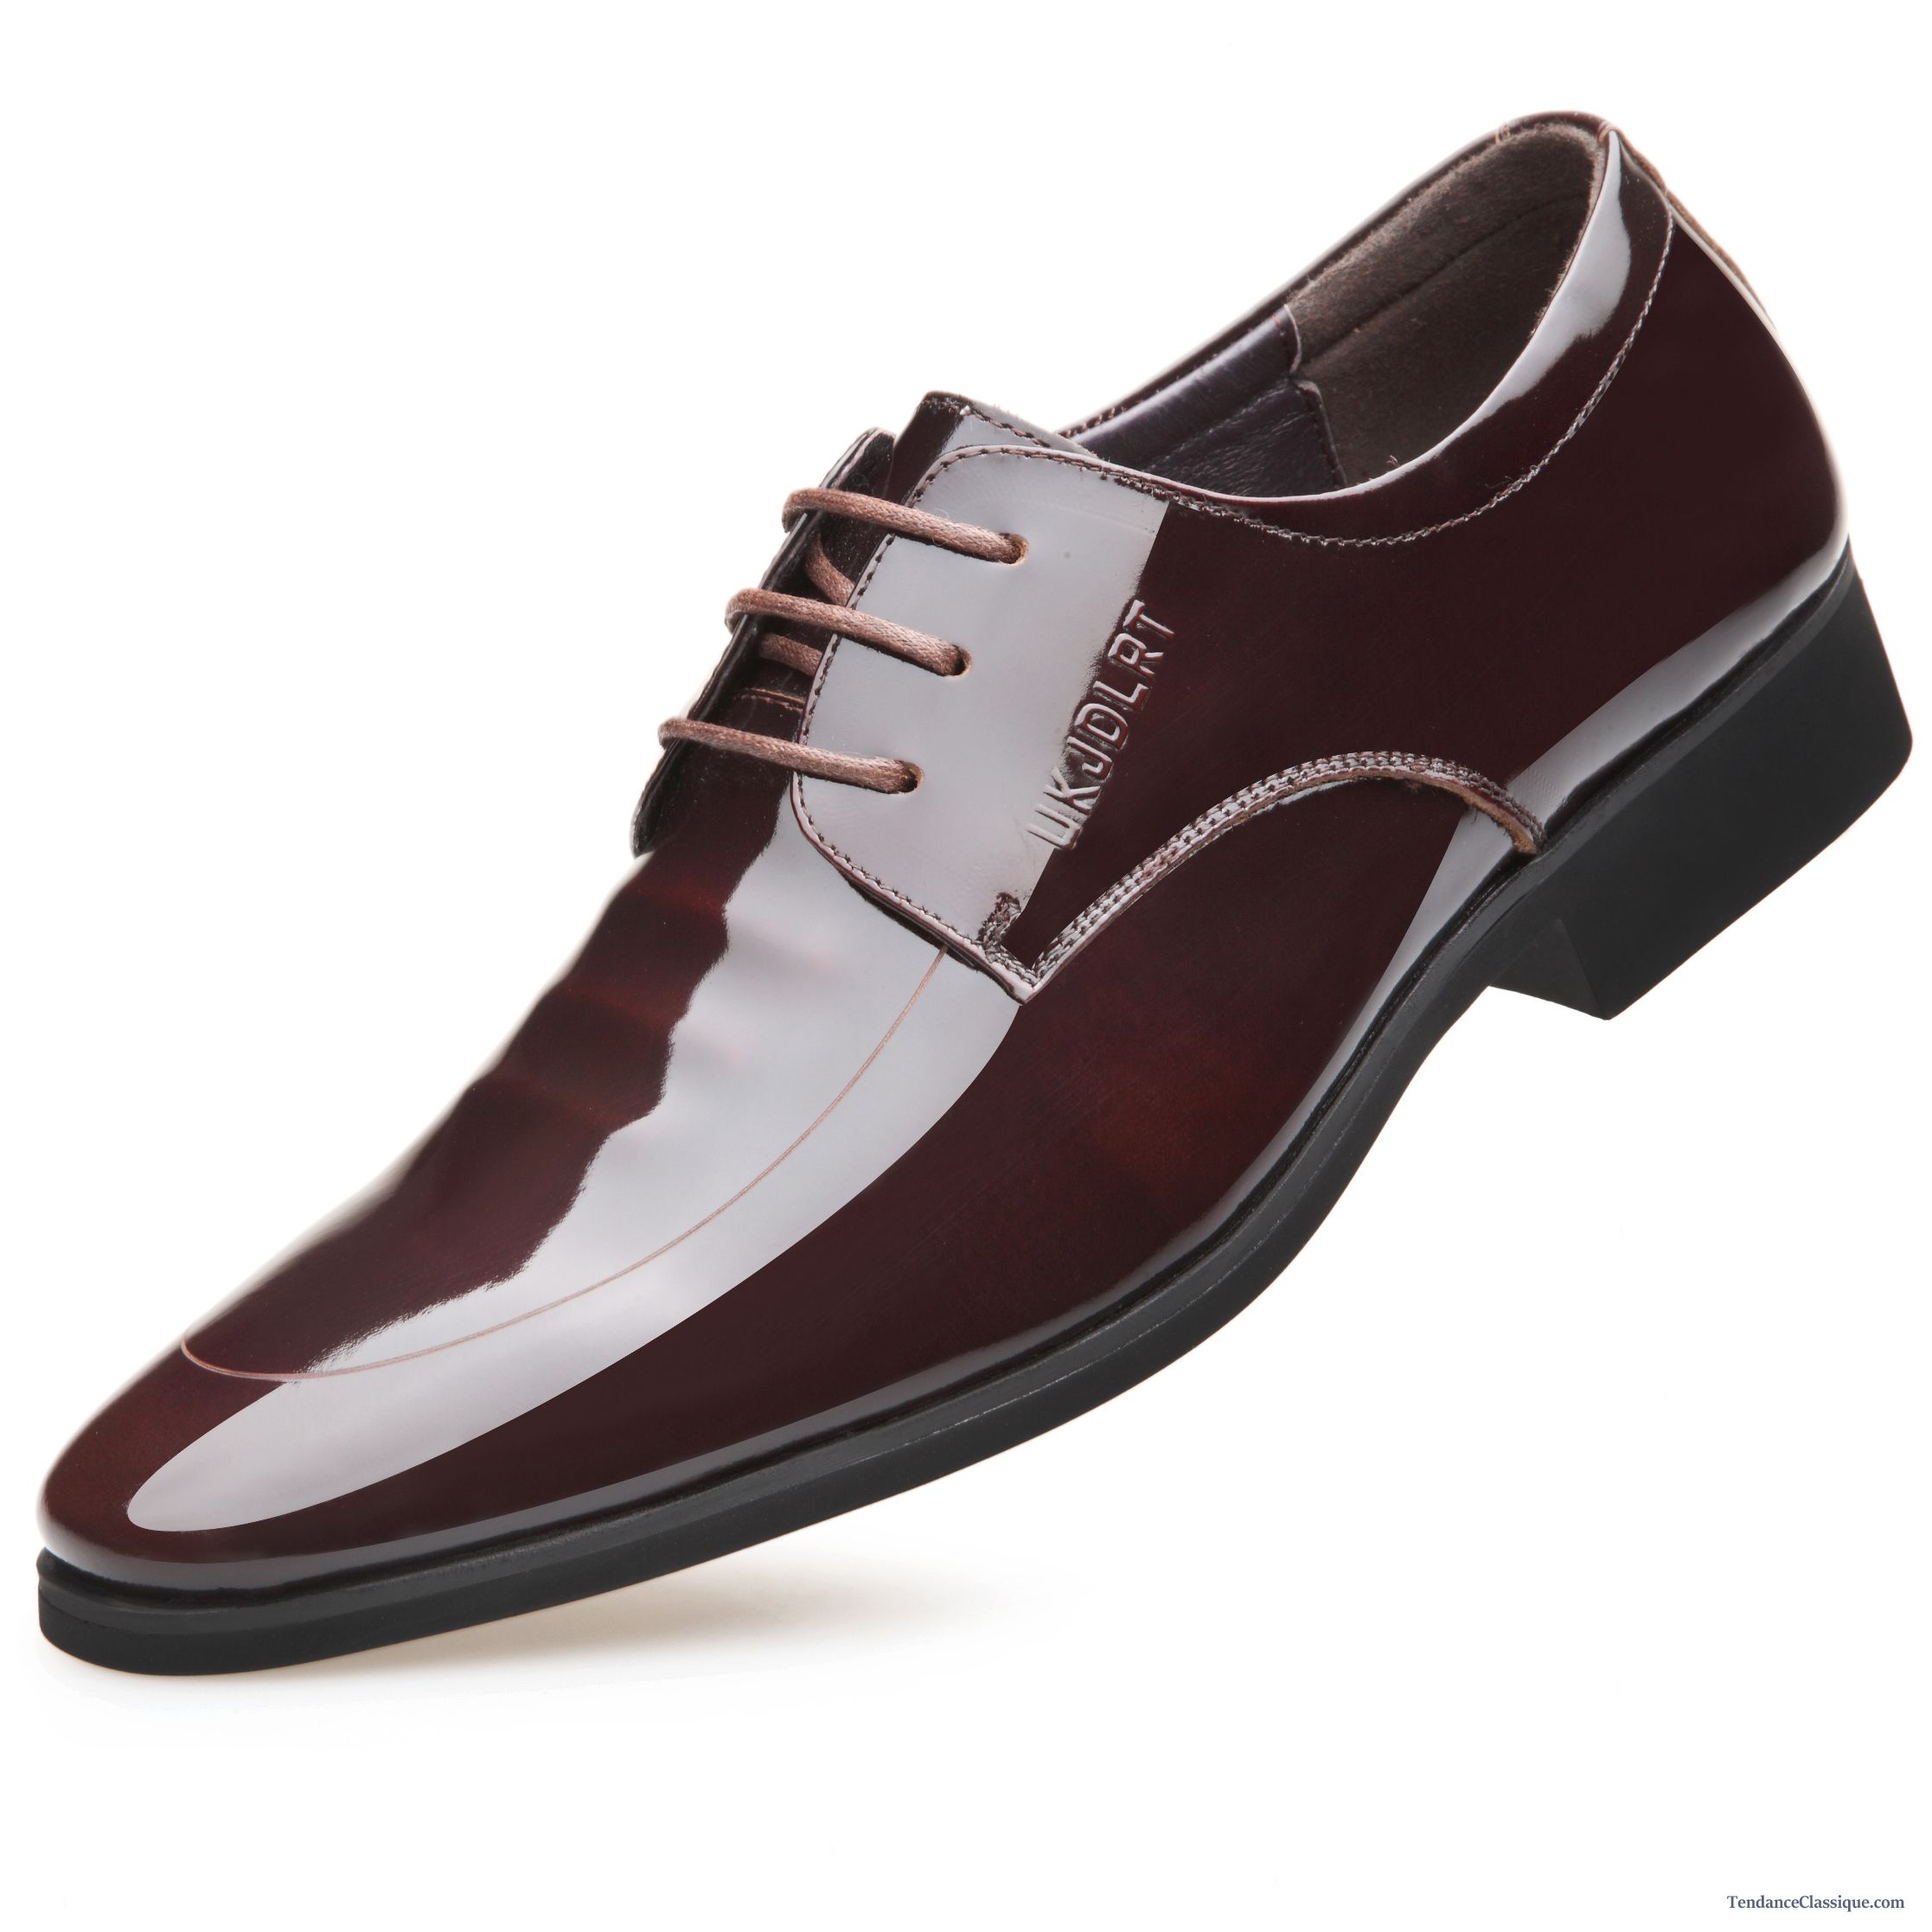 Bottines Cuir Rouge Homme Blanc, Chaussures Cuir Homme Grande Taille Soldes